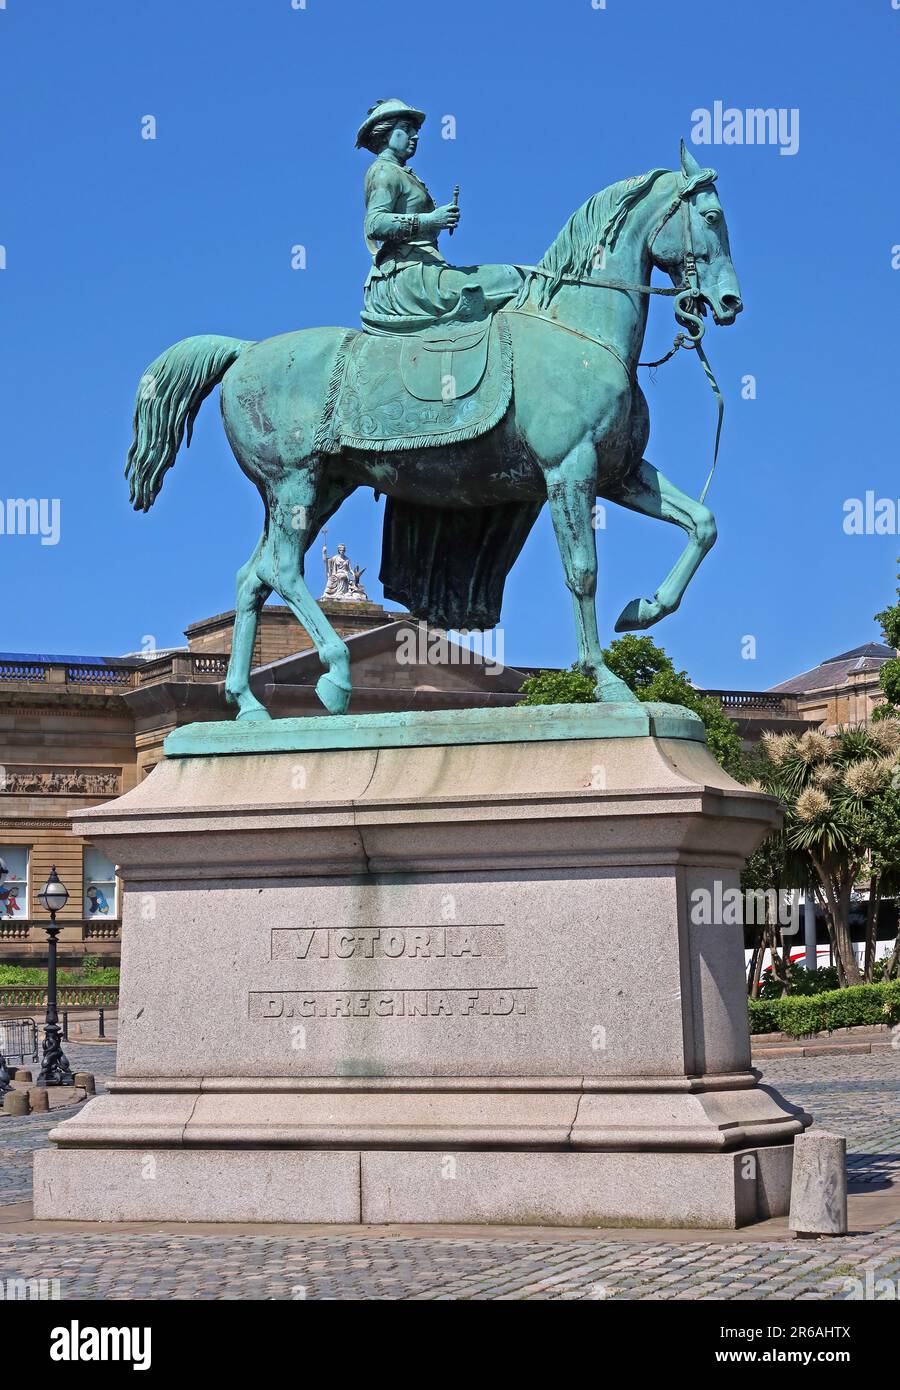 Bronze statue of Queen Victoria, DG Regina FD, riding a horse, inspecting Liverpool on St Georges plateau by Thomas Thornycroft (1814-1885) L1 1JJ Stock Photo